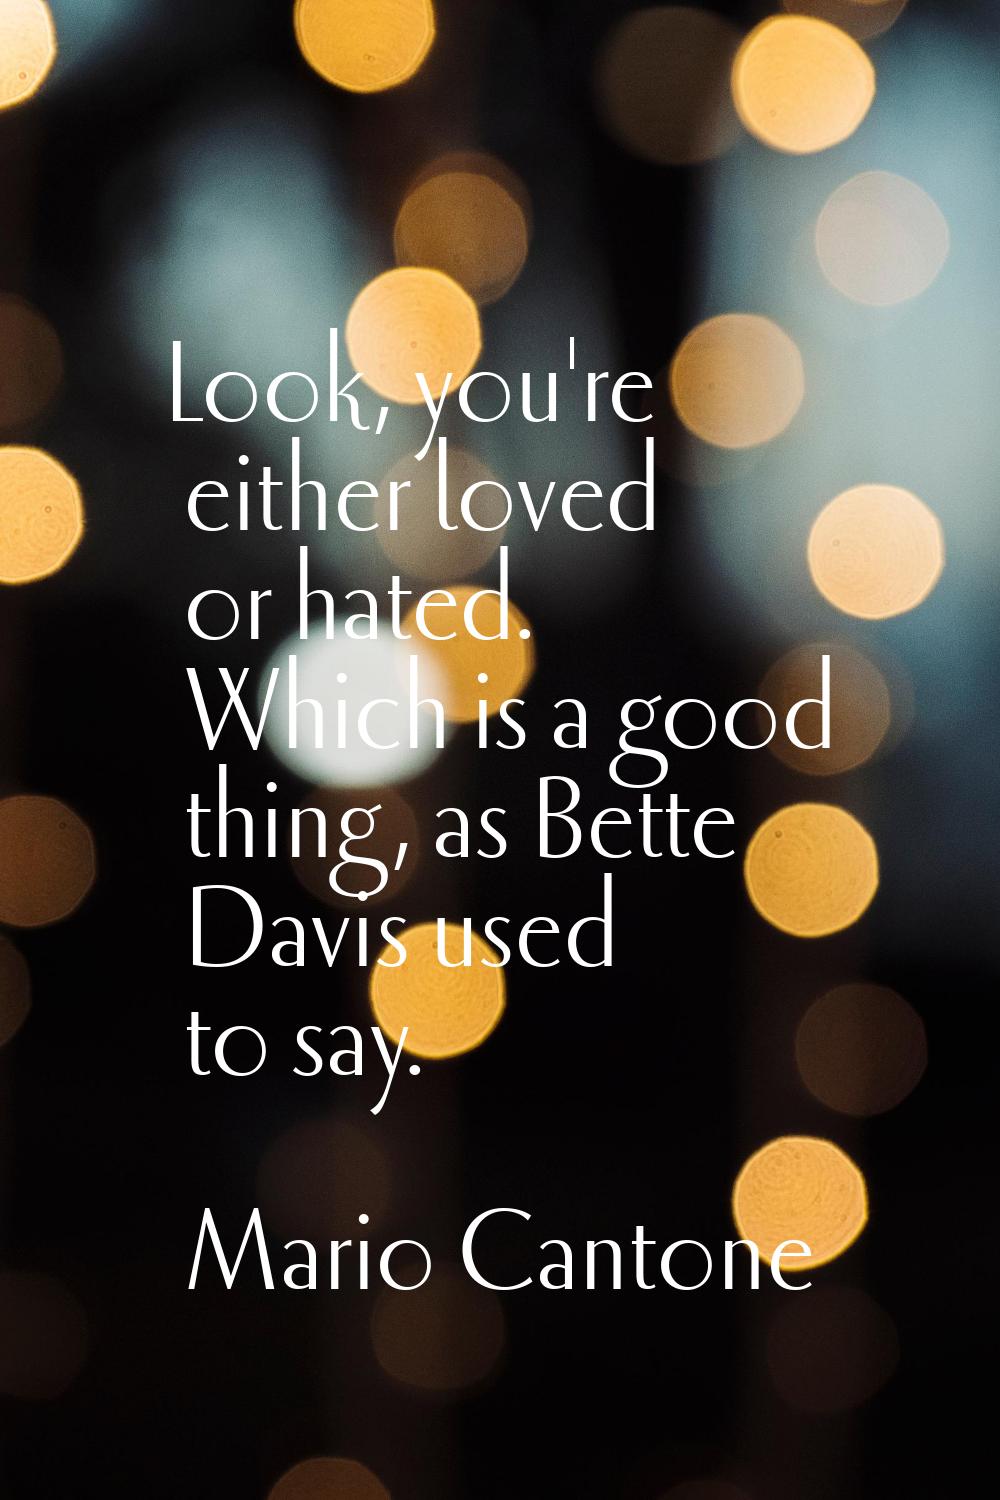 Look, you're either loved or hated. Which is a good thing, as Bette Davis used to say.